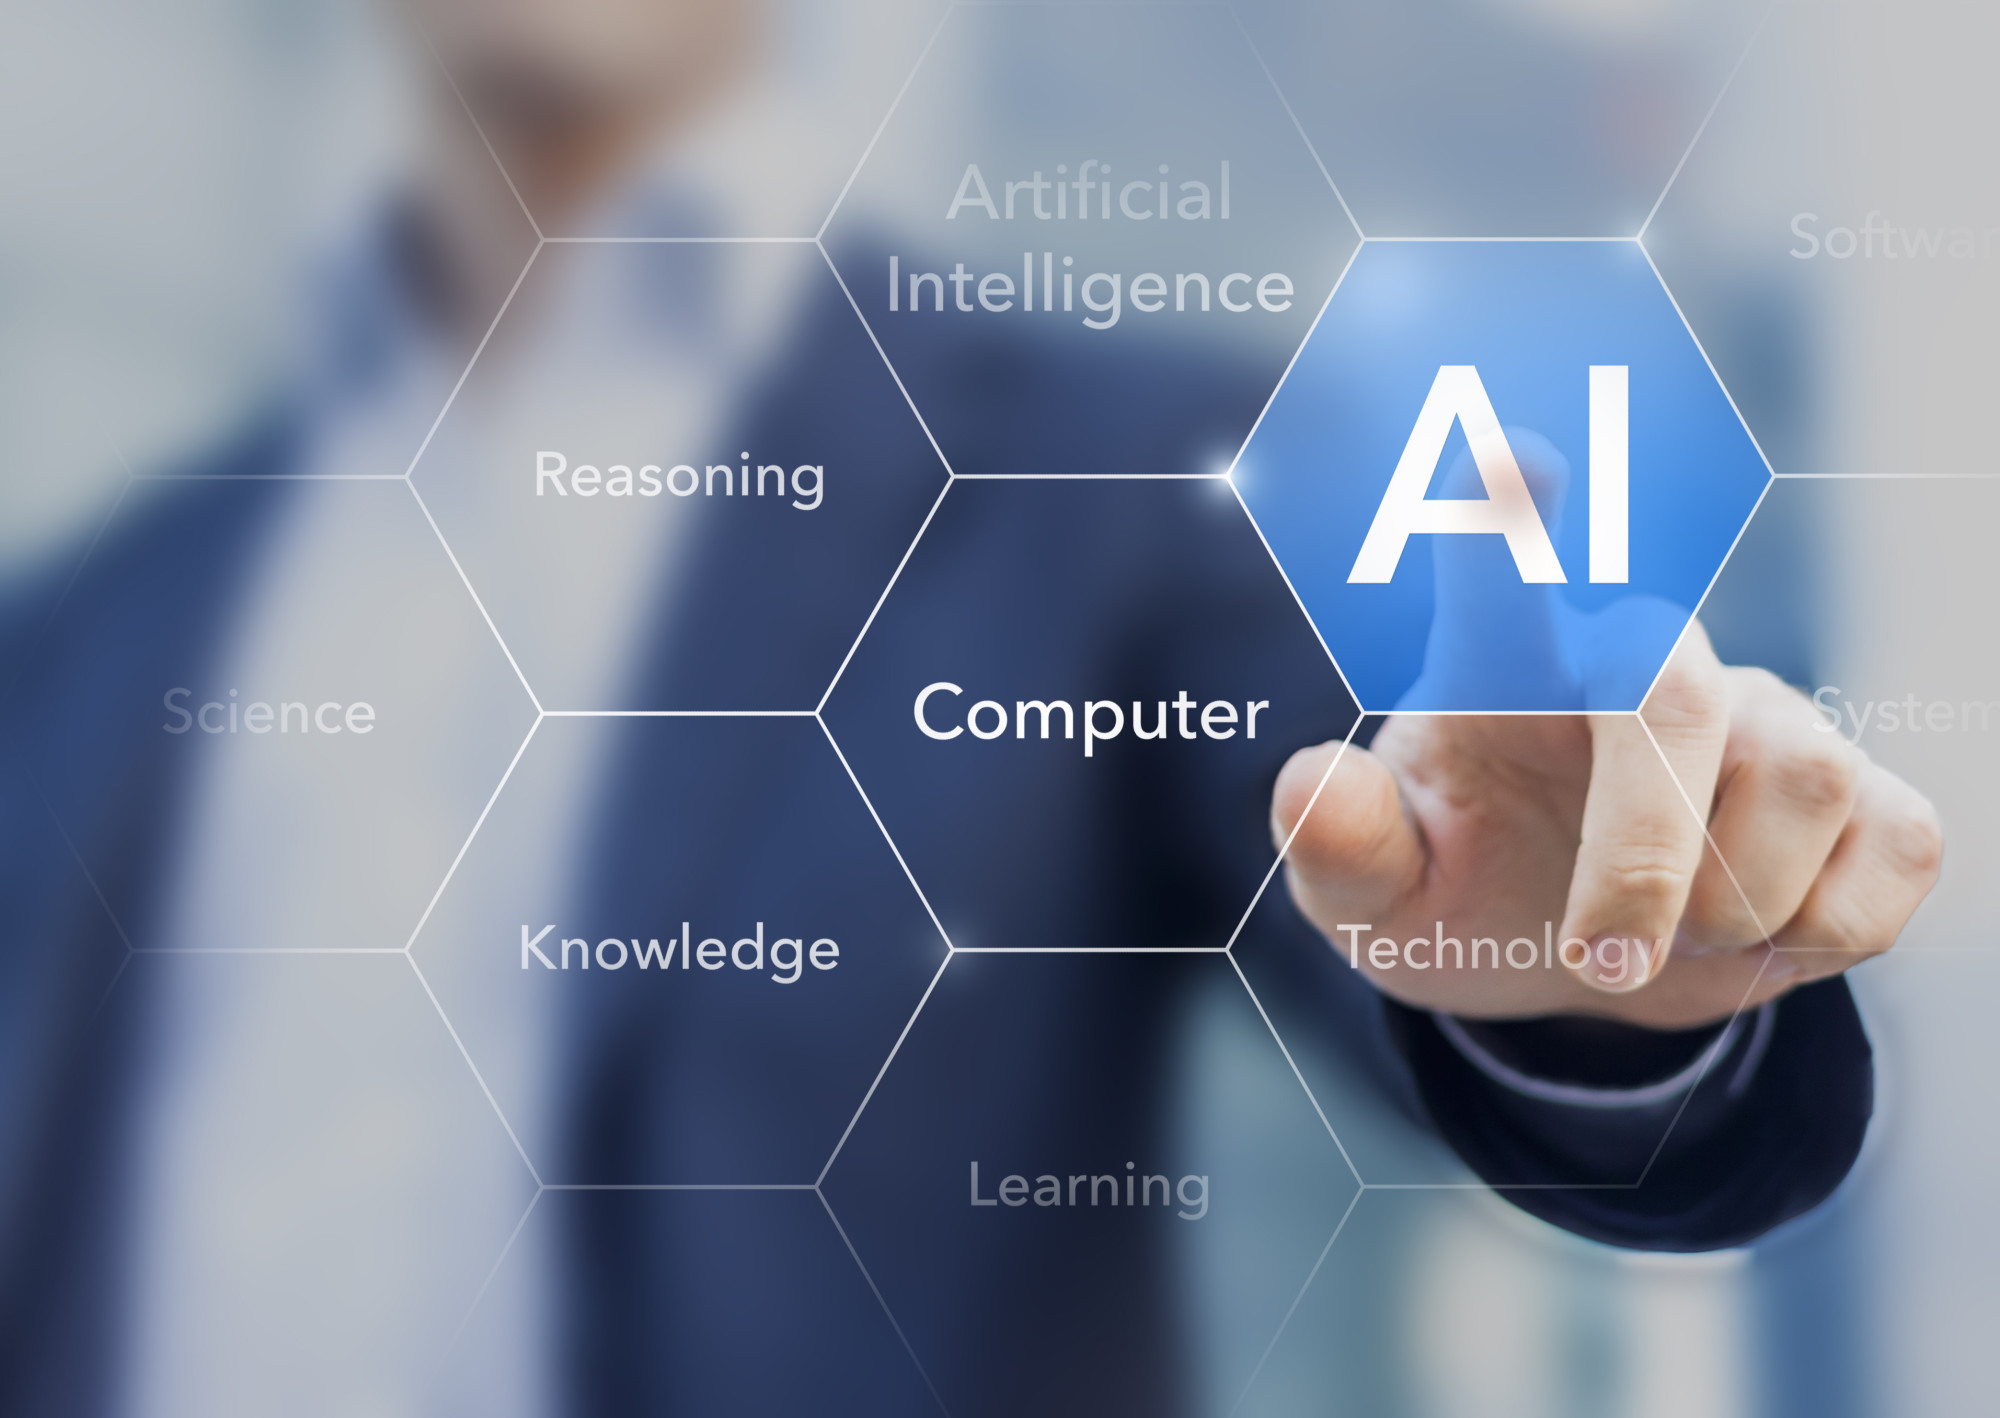 5 Amazing Uses for AI That You May Not Have Heard About